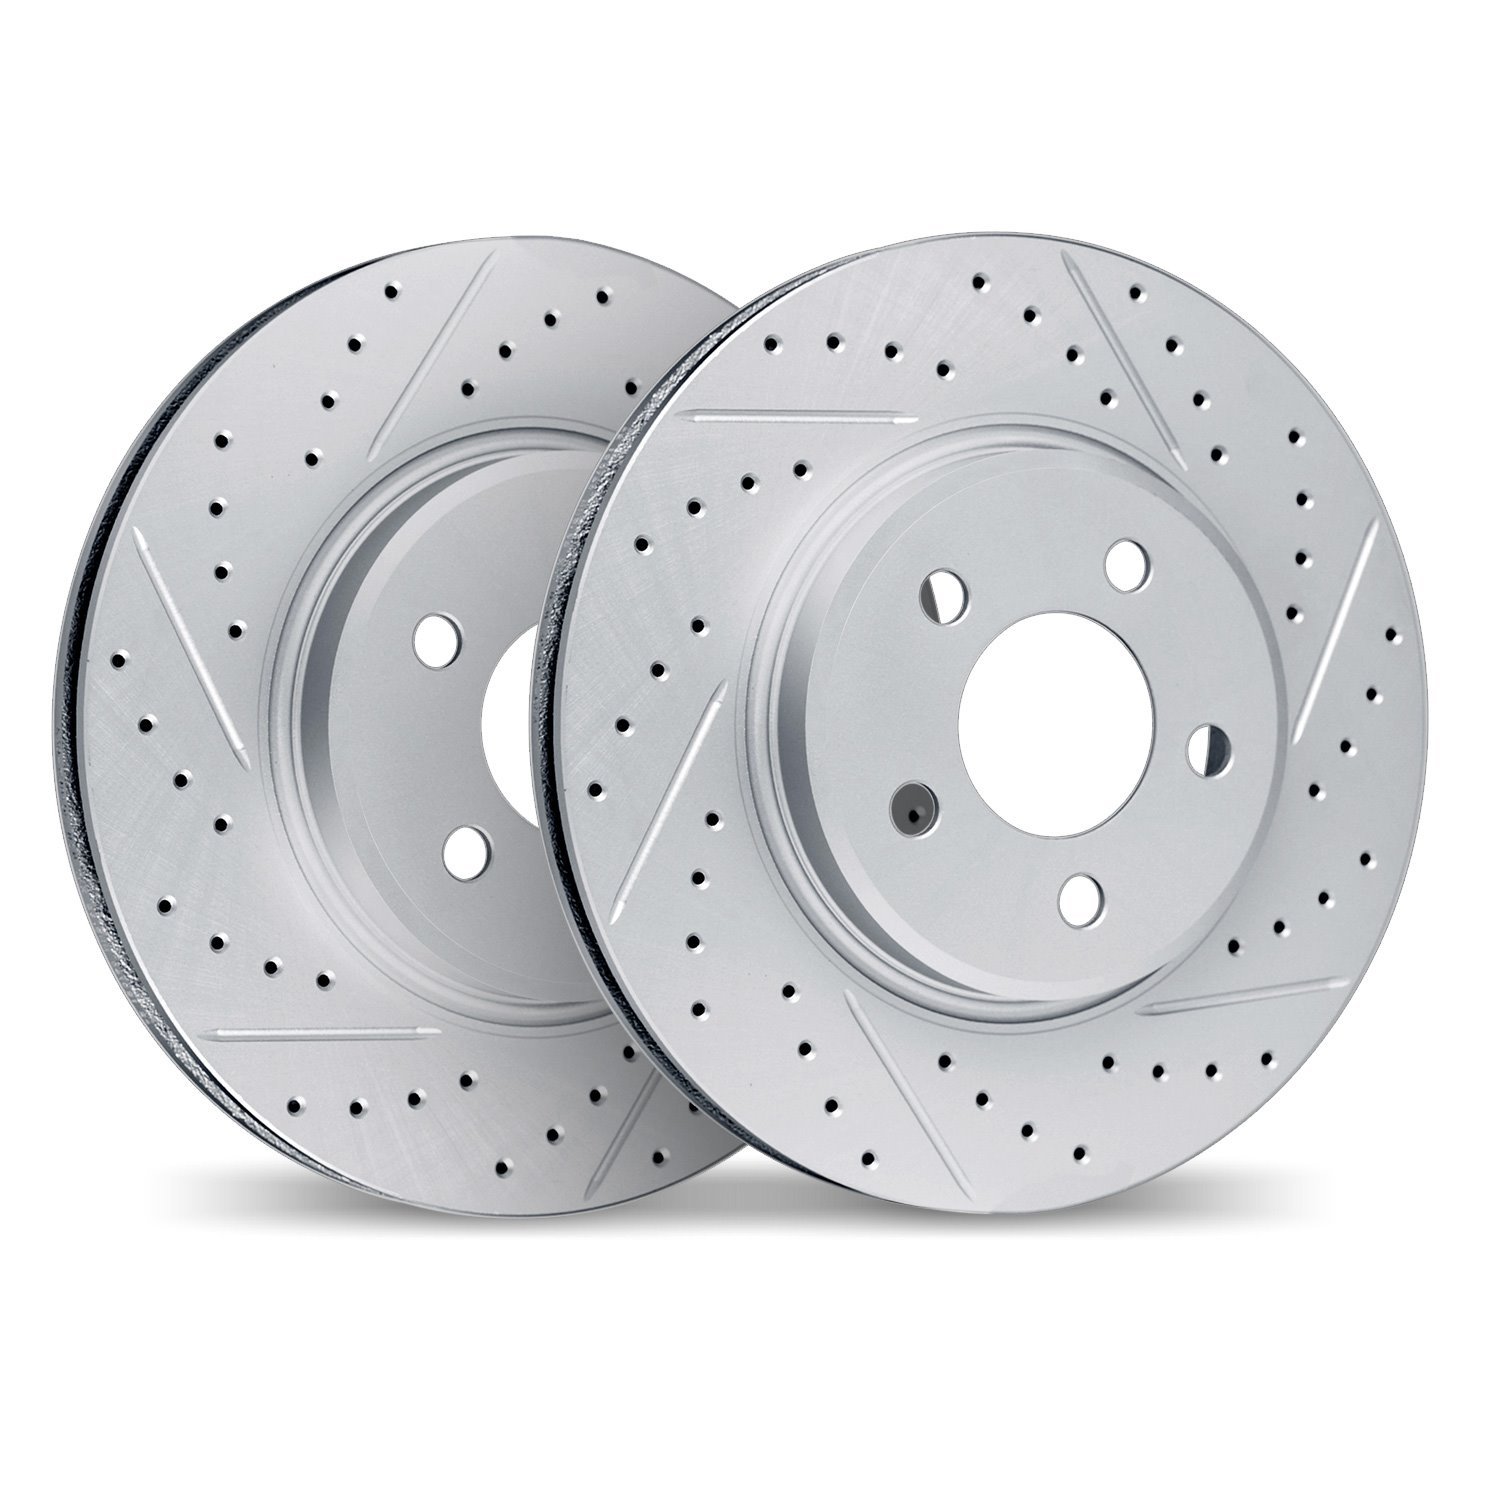 2002-75008 Geoperformance Drilled/Slotted Brake Rotors, Fits Select Lexus/Toyota/Scion, Position: Front